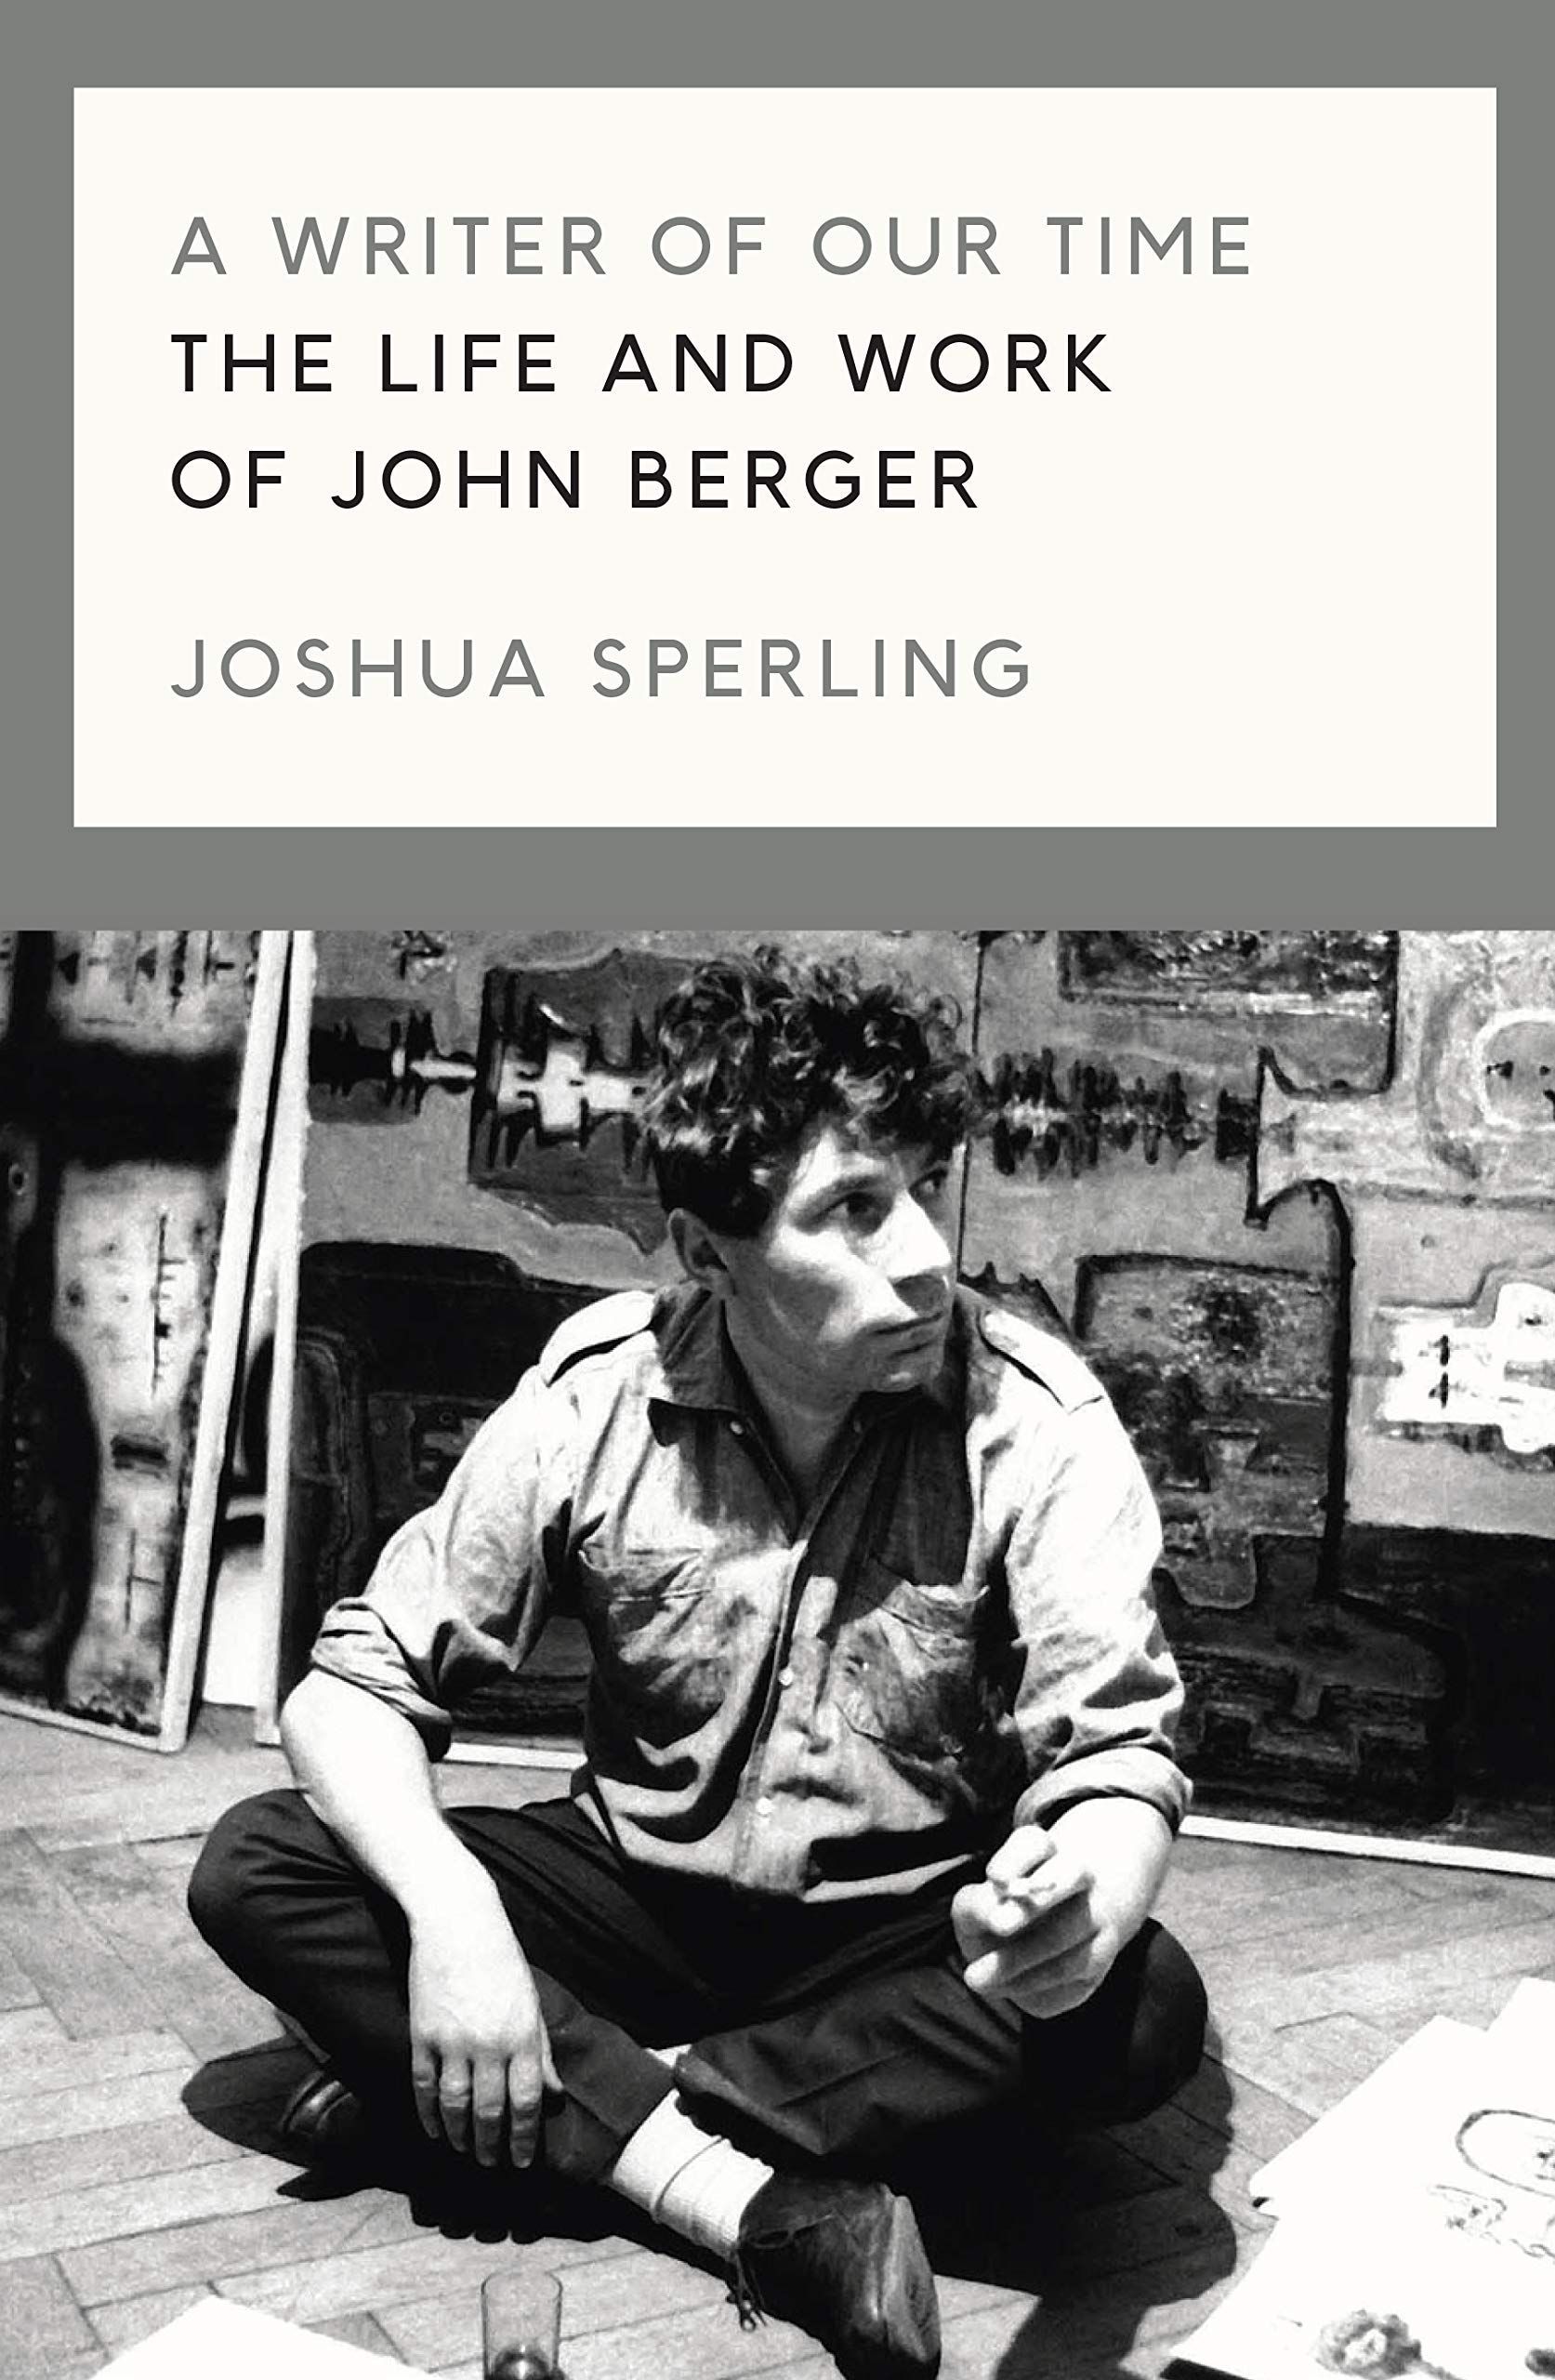 The Window and the World: On Joshua Sperling’s “A Writer of Our Time: The Life and Work of John Berger”